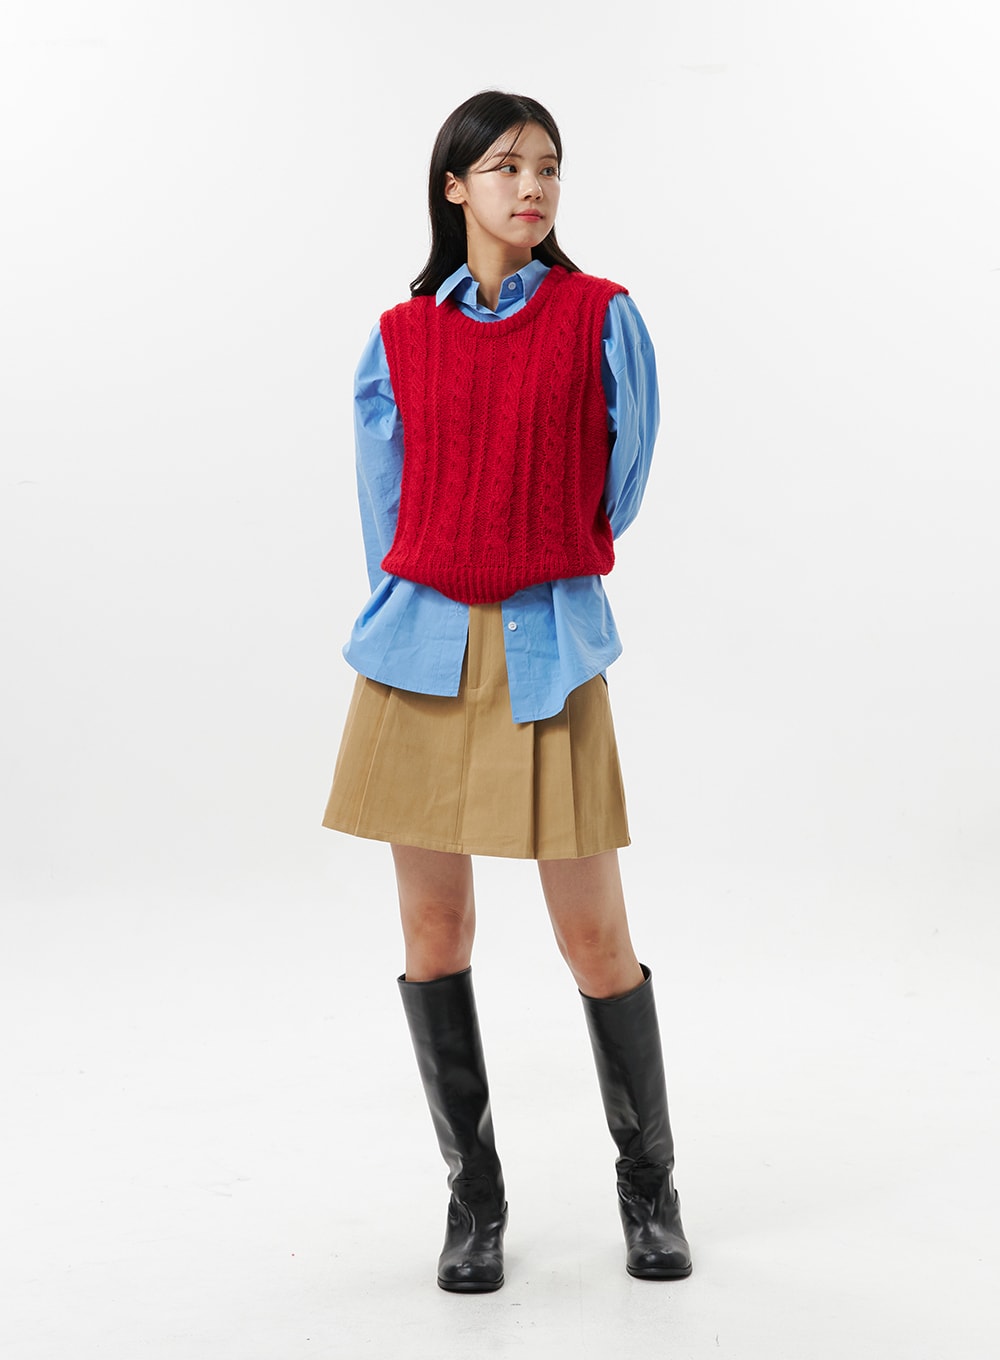 cable-knit-vest-oo312